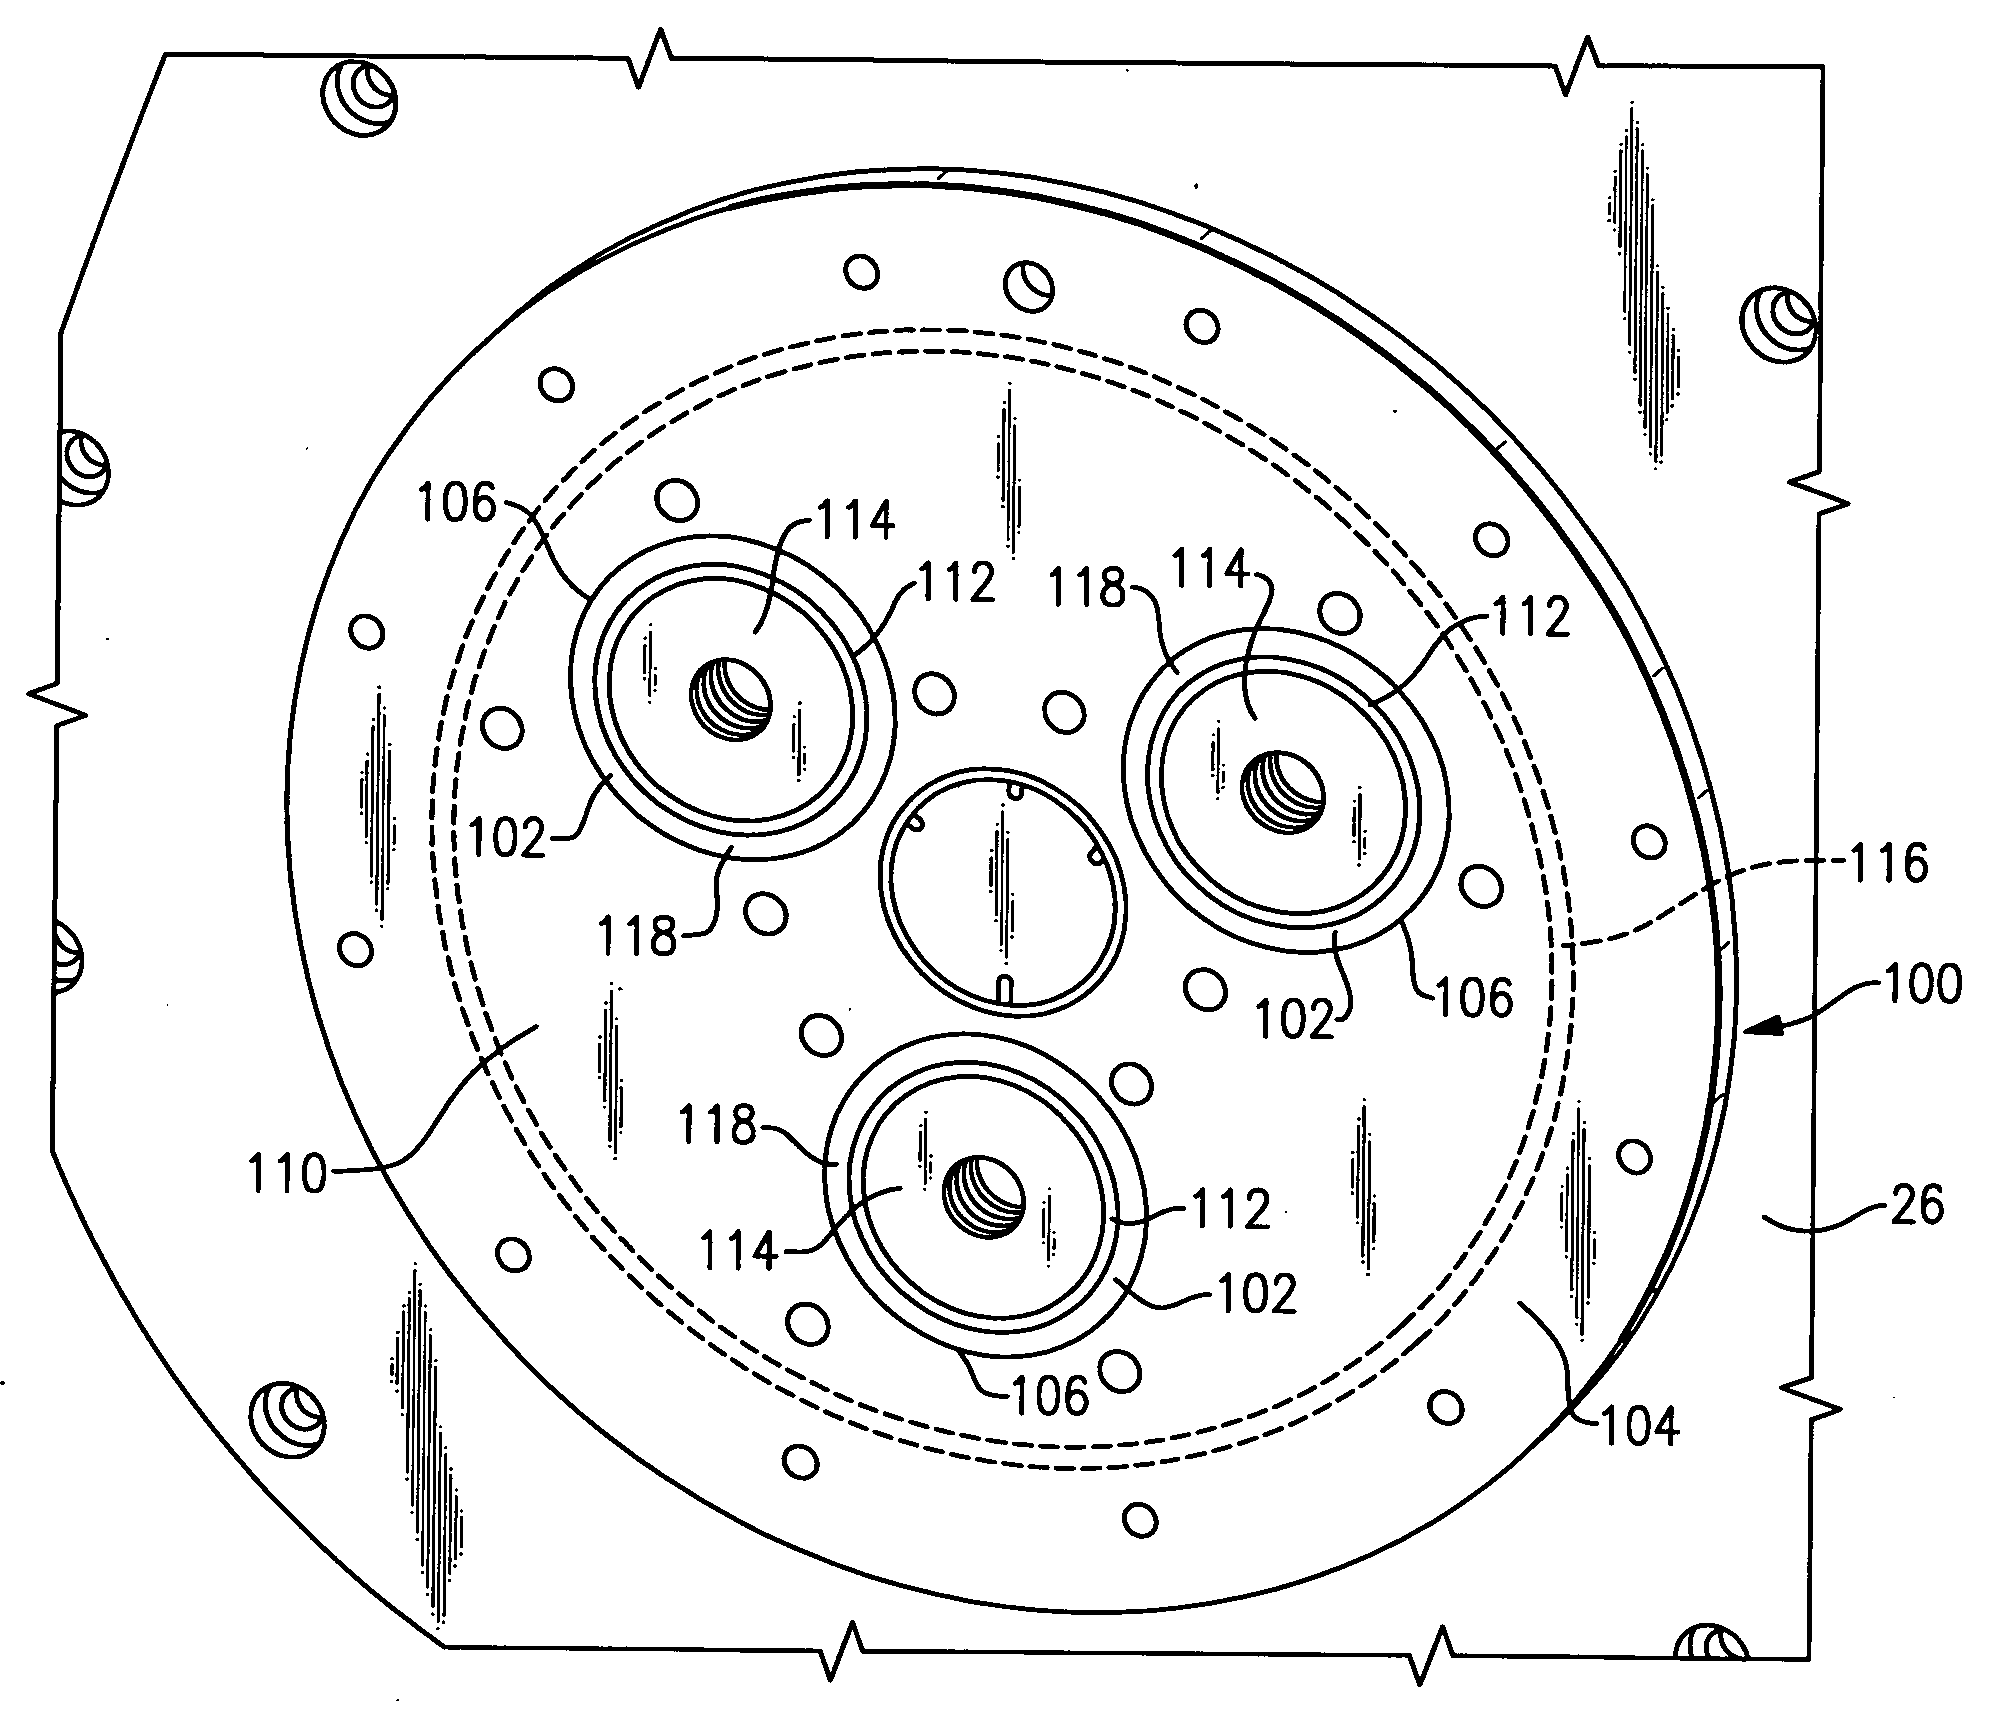 Electric motor with static brake